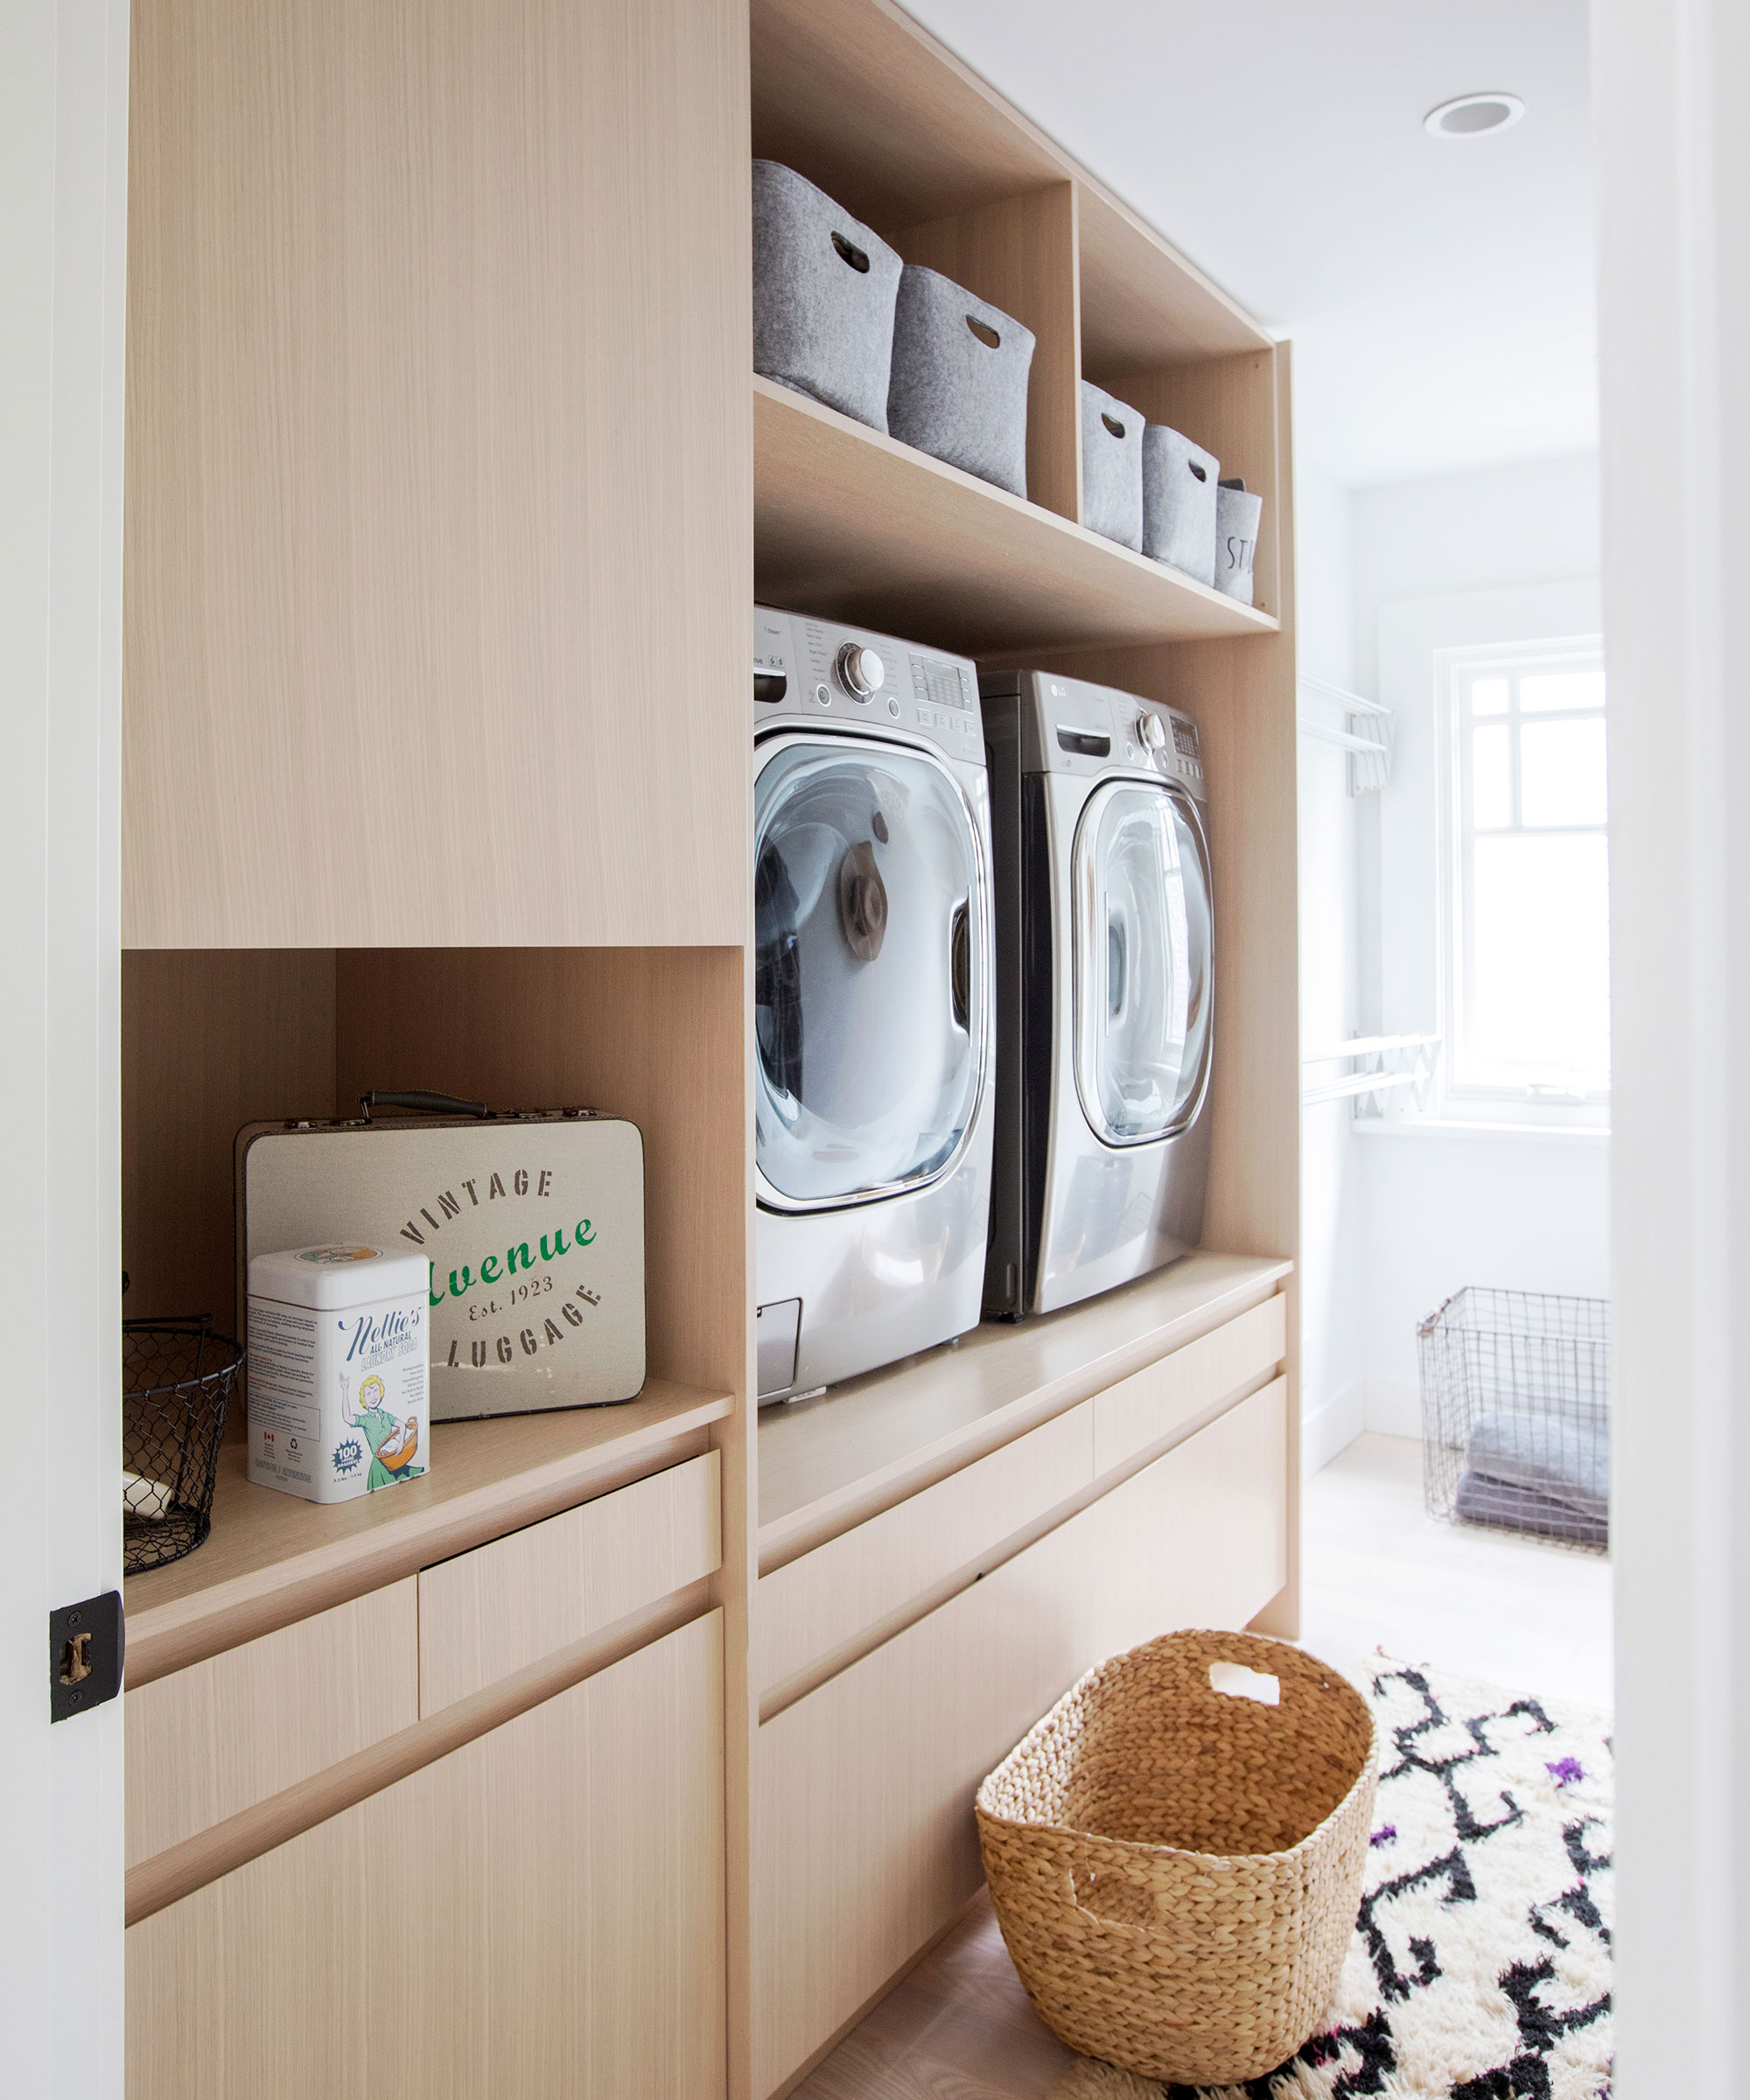 Small laundry room with built-in cabinetry for washer dryer and decorative rug on the floor beneath woven basket